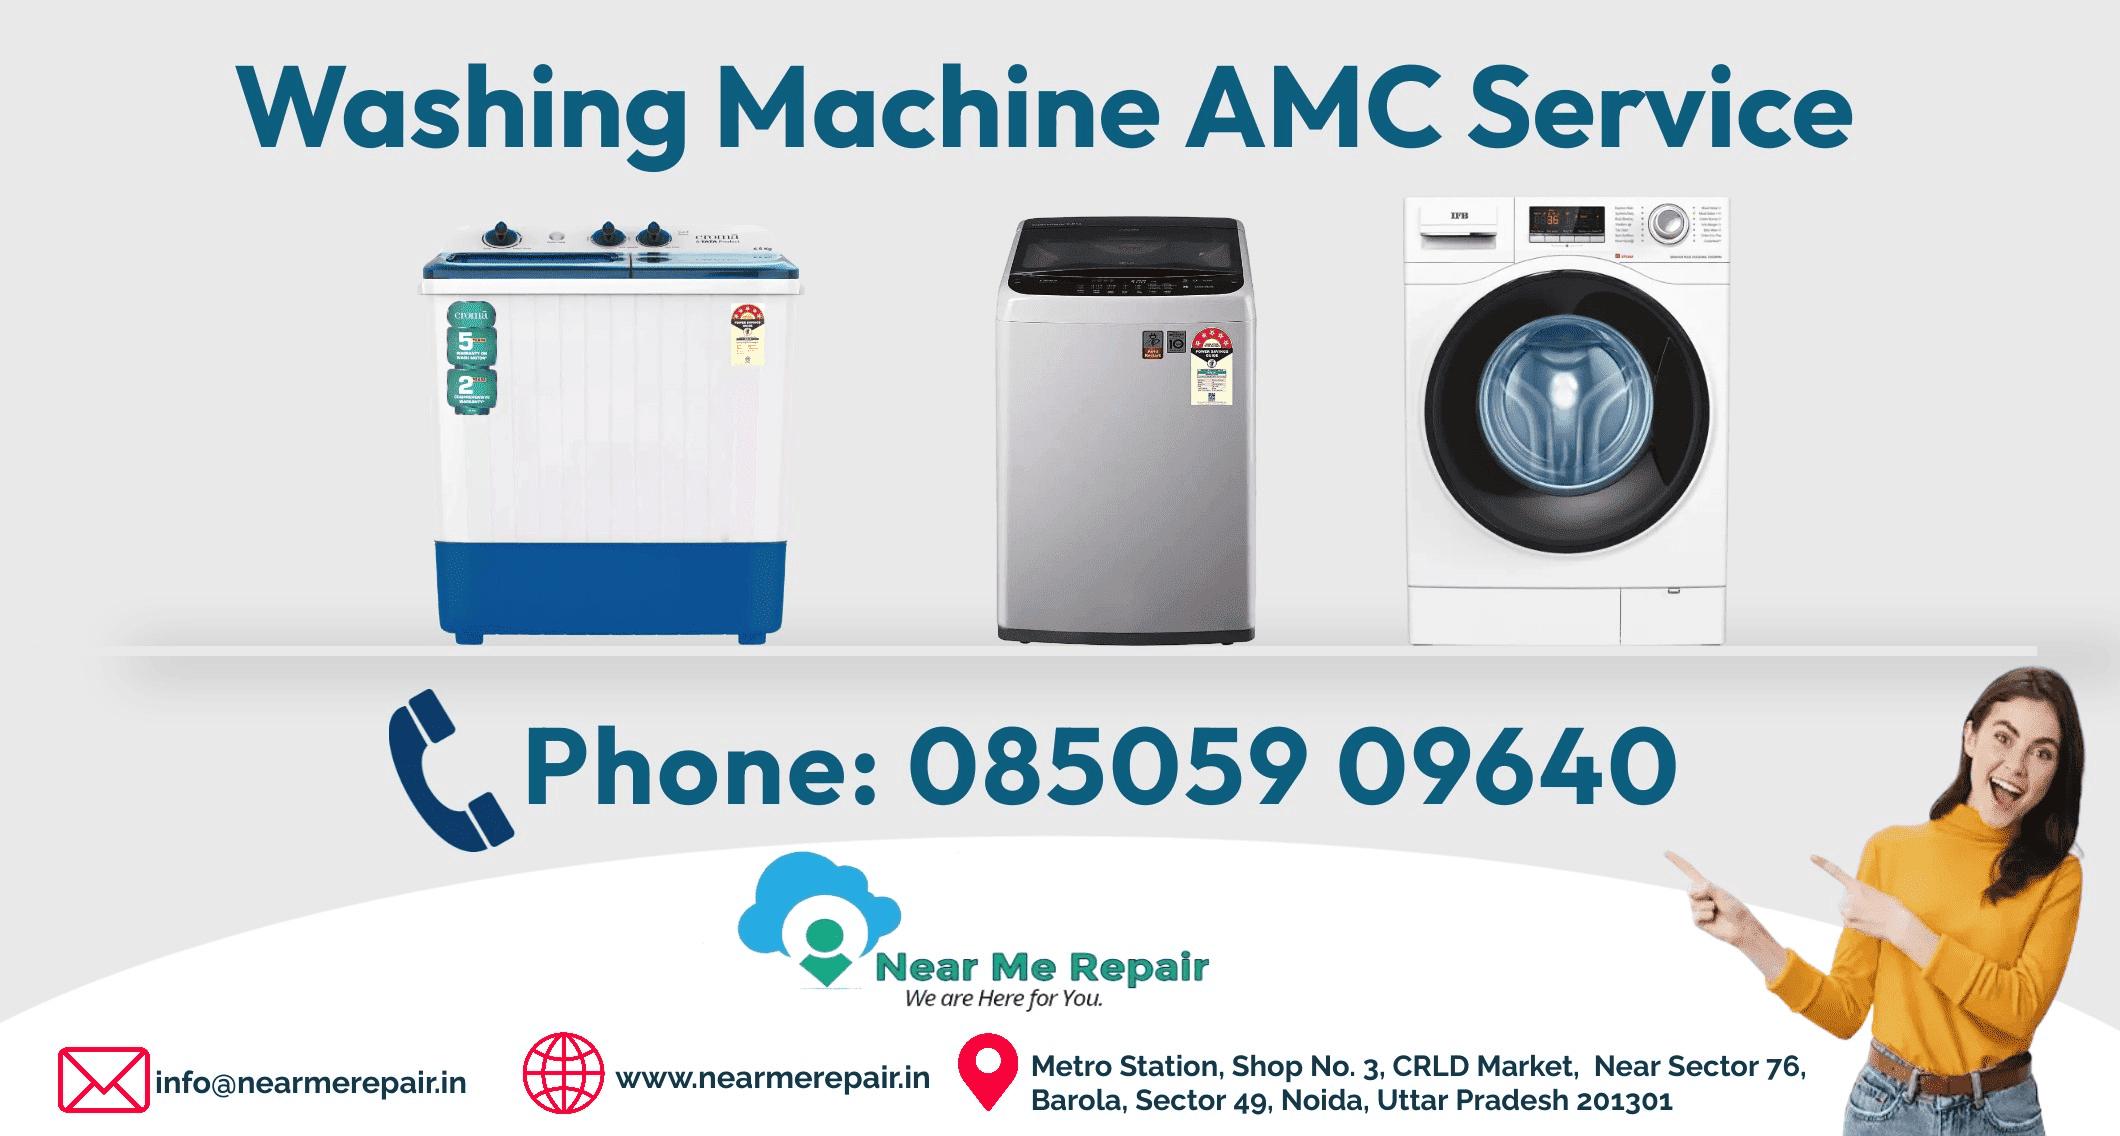 Explore superior washing machine AMC services near Delhi-NCR for seamless and efficient laundry care.